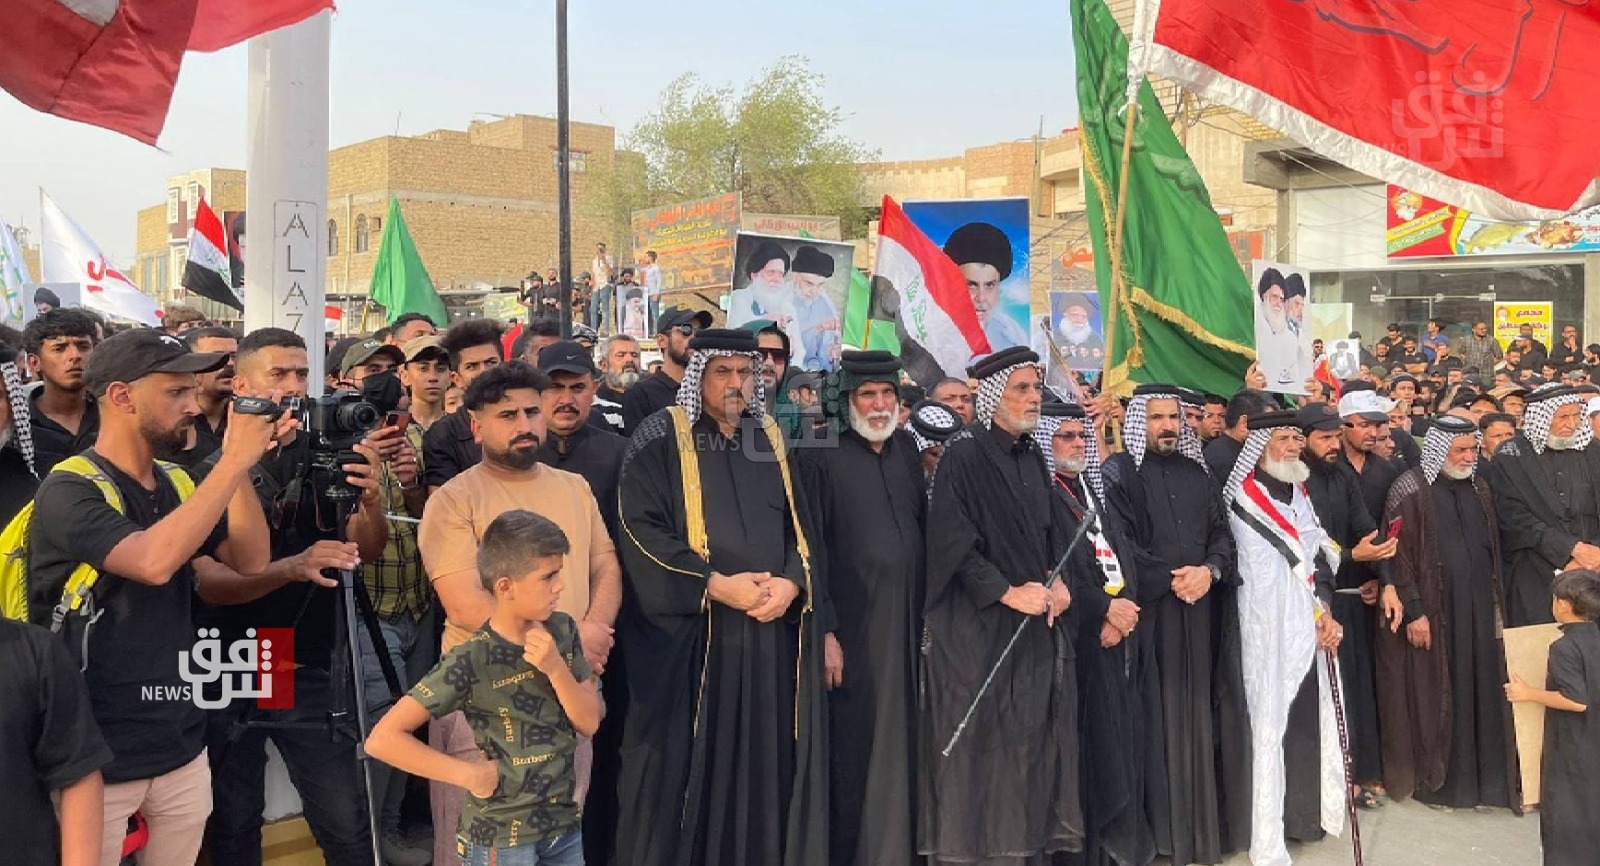 Iraqi factions return to the streets in rival protests